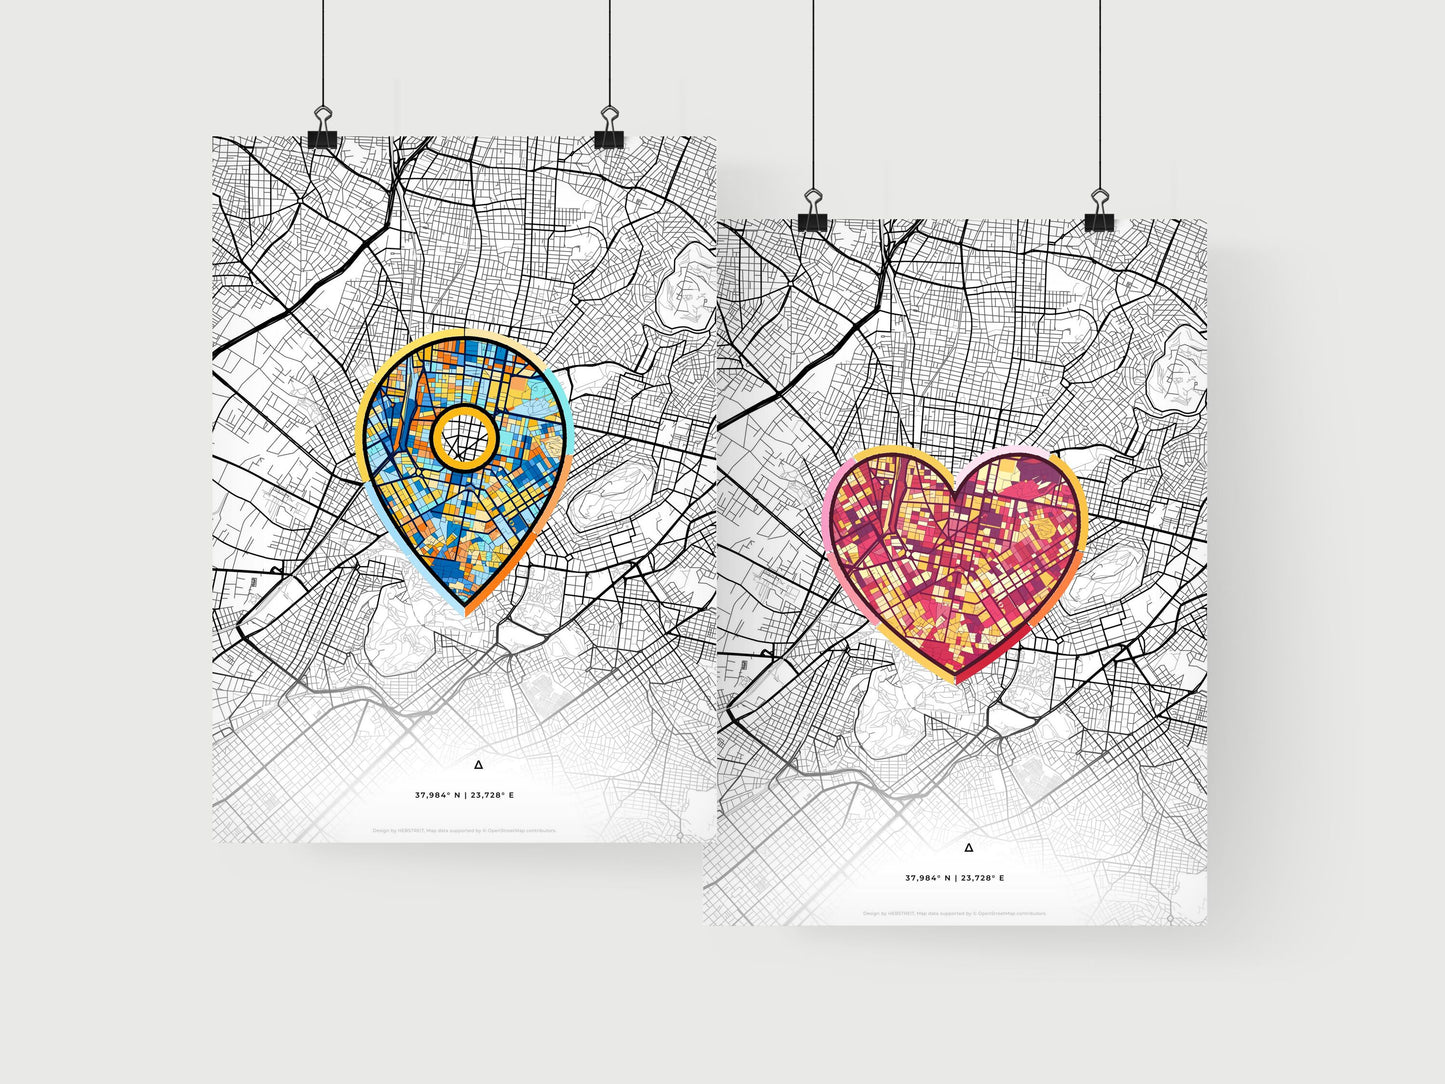 ATHENS GREECE minimal art map with a colorful icon. Where it all began, Couple map gift.